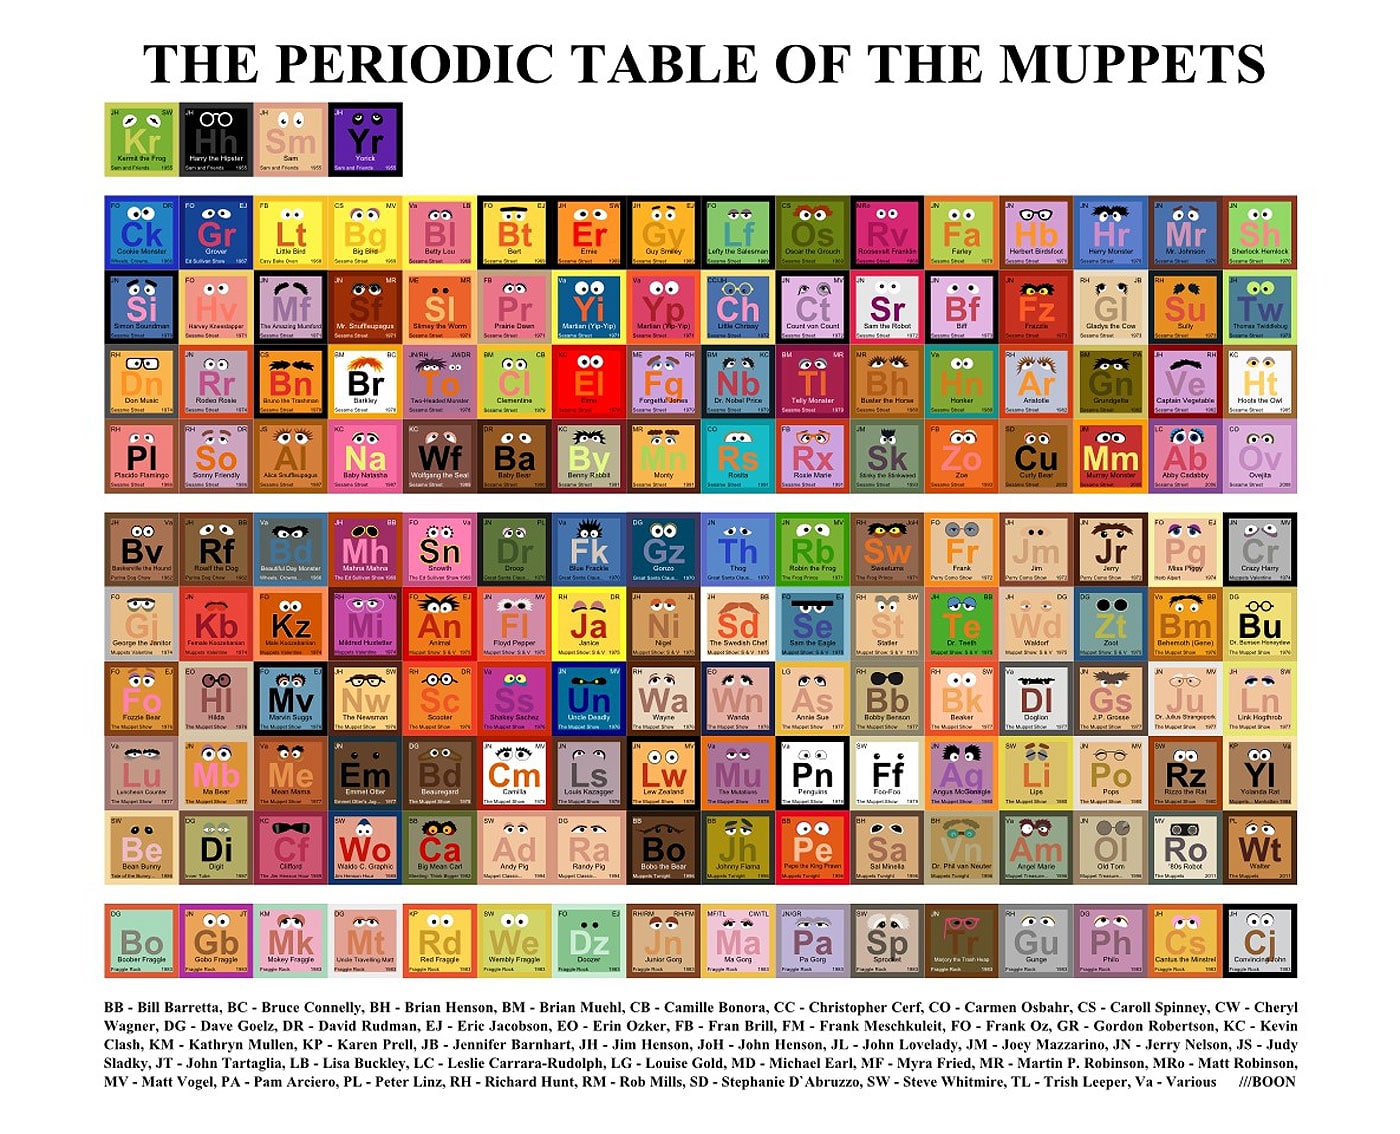 muppet-characters-classification-chart